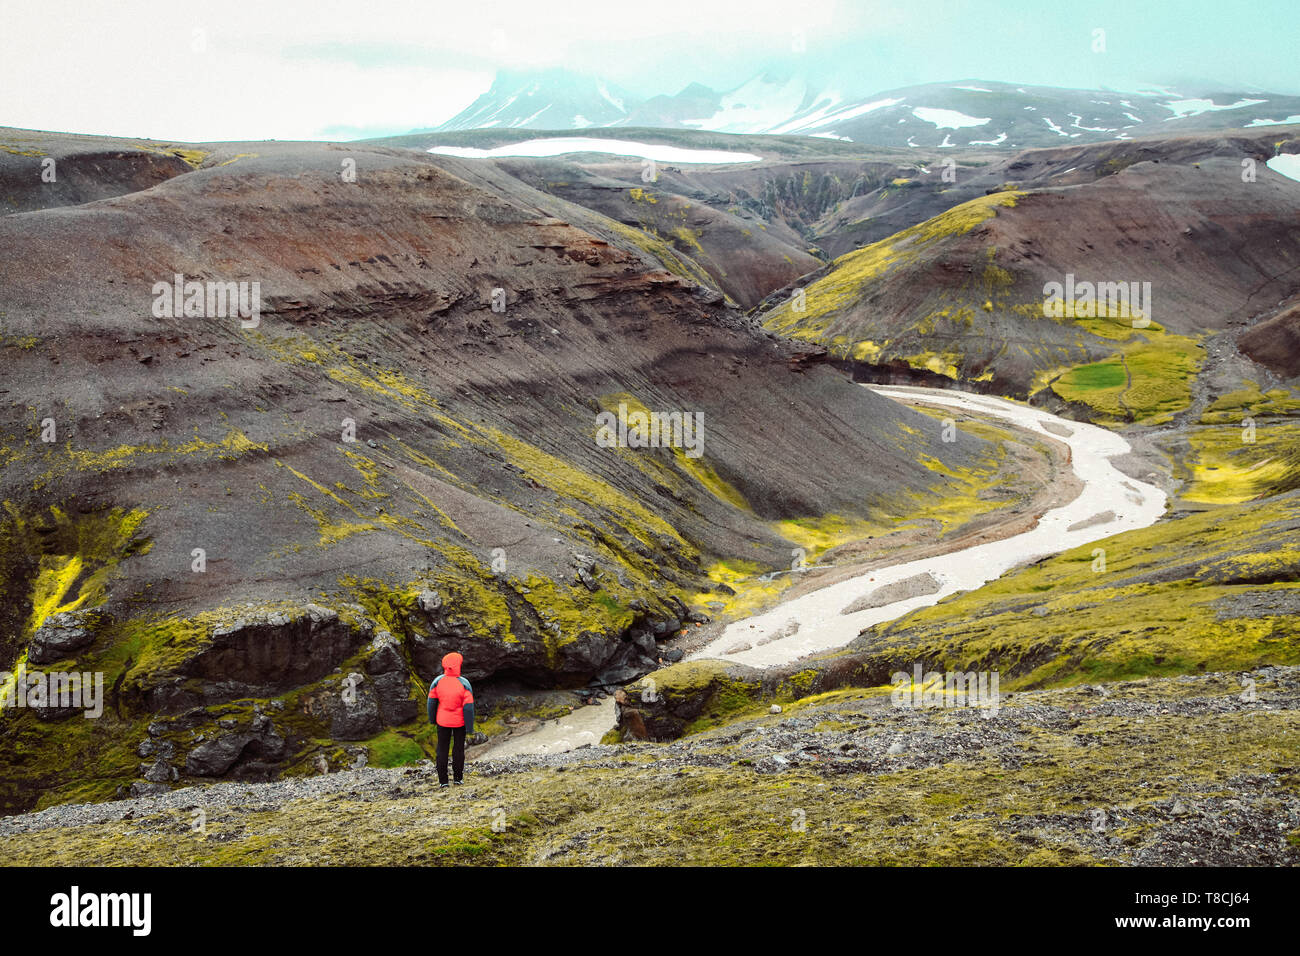 Beautiful view of idyllic mountain scenery with person hiking in Landmannalaugar in the highlands of Iceland Stock Photo